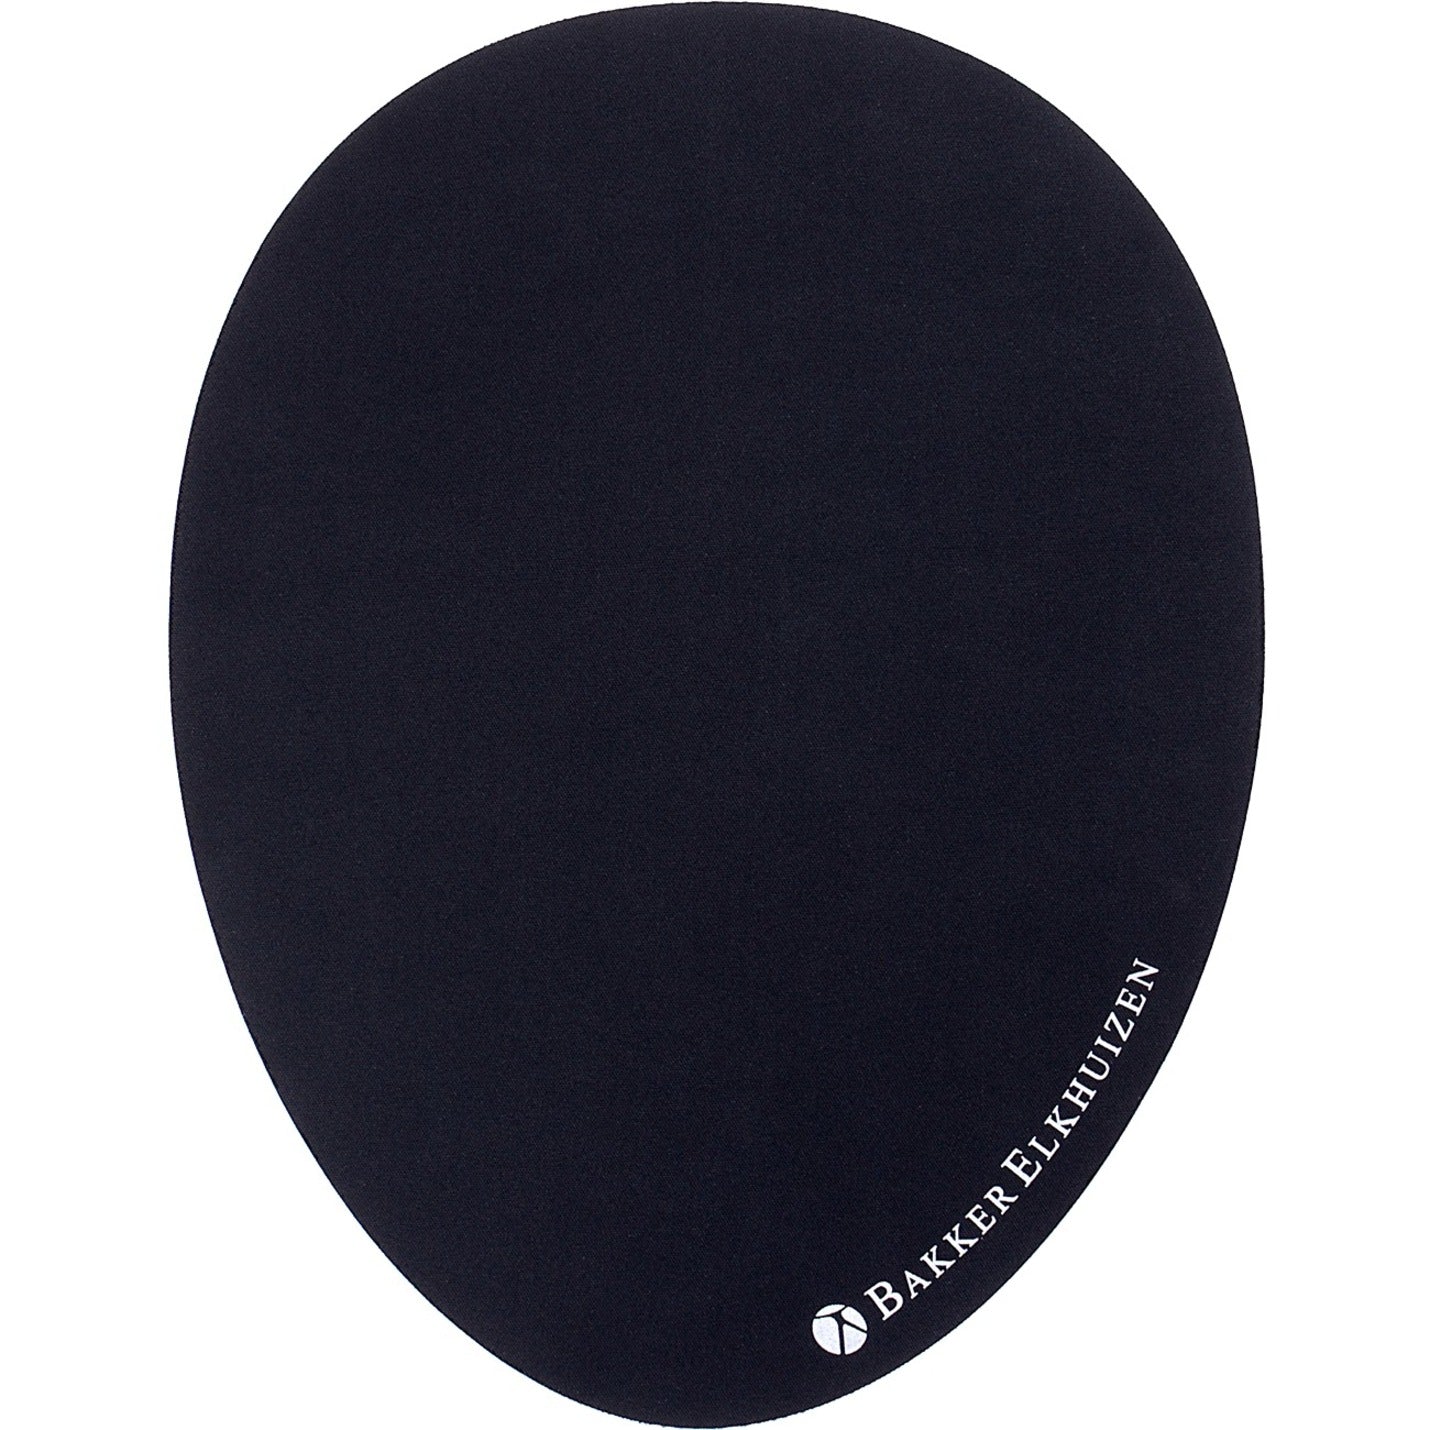 Bakker Elkhuizen BNEEMP The Egg Ergonomic Mouse Pad, Comfortable and Supportive Mouse Pad for Improved Ergonomics